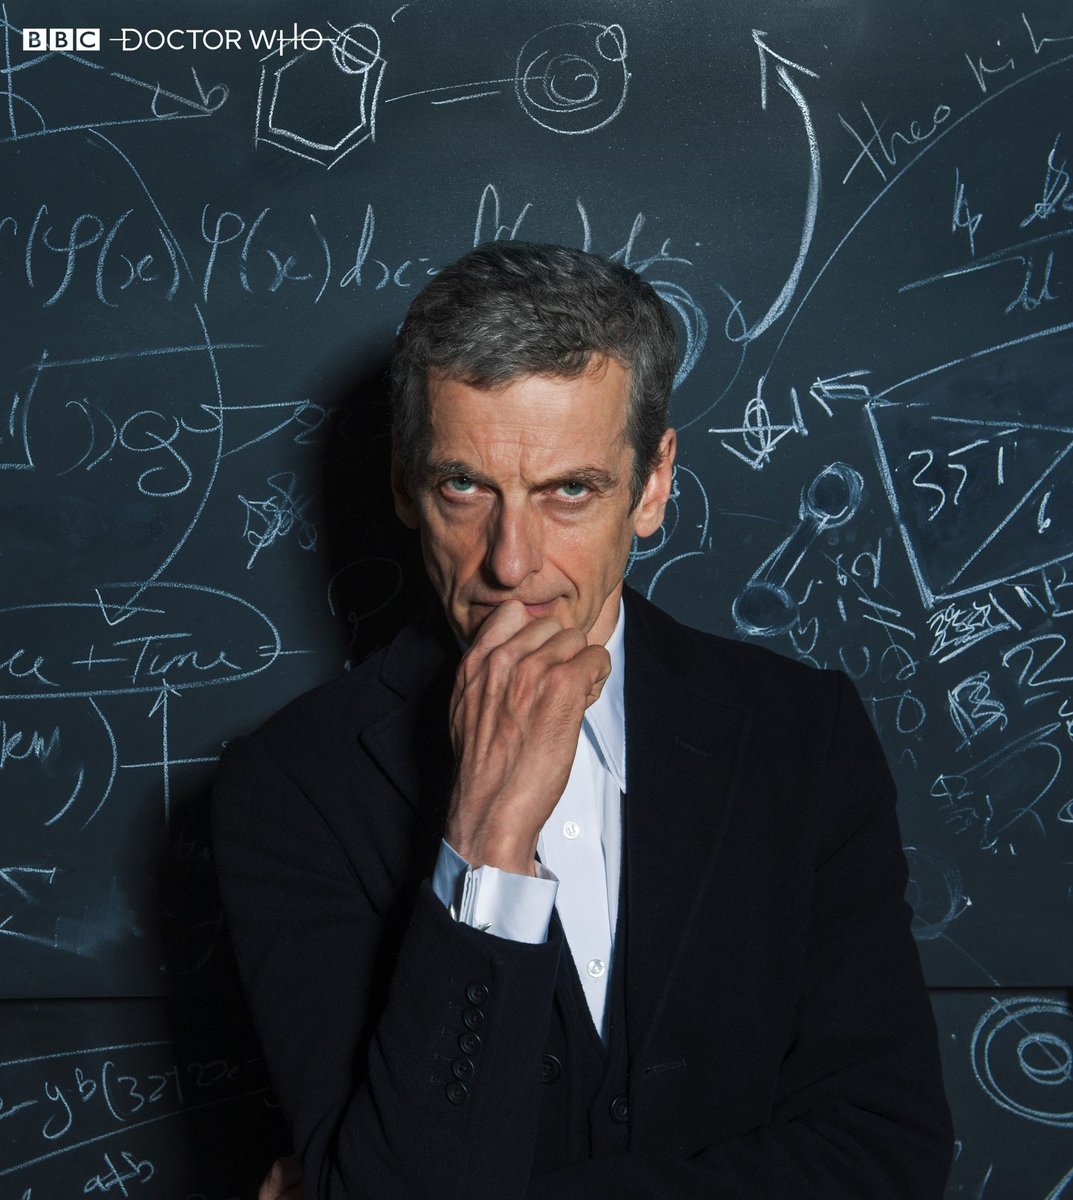 Seven years ago today, Peter Capaldi was announced as the Twelfth Doctor! 😲🚫🍐 #DoctorWho